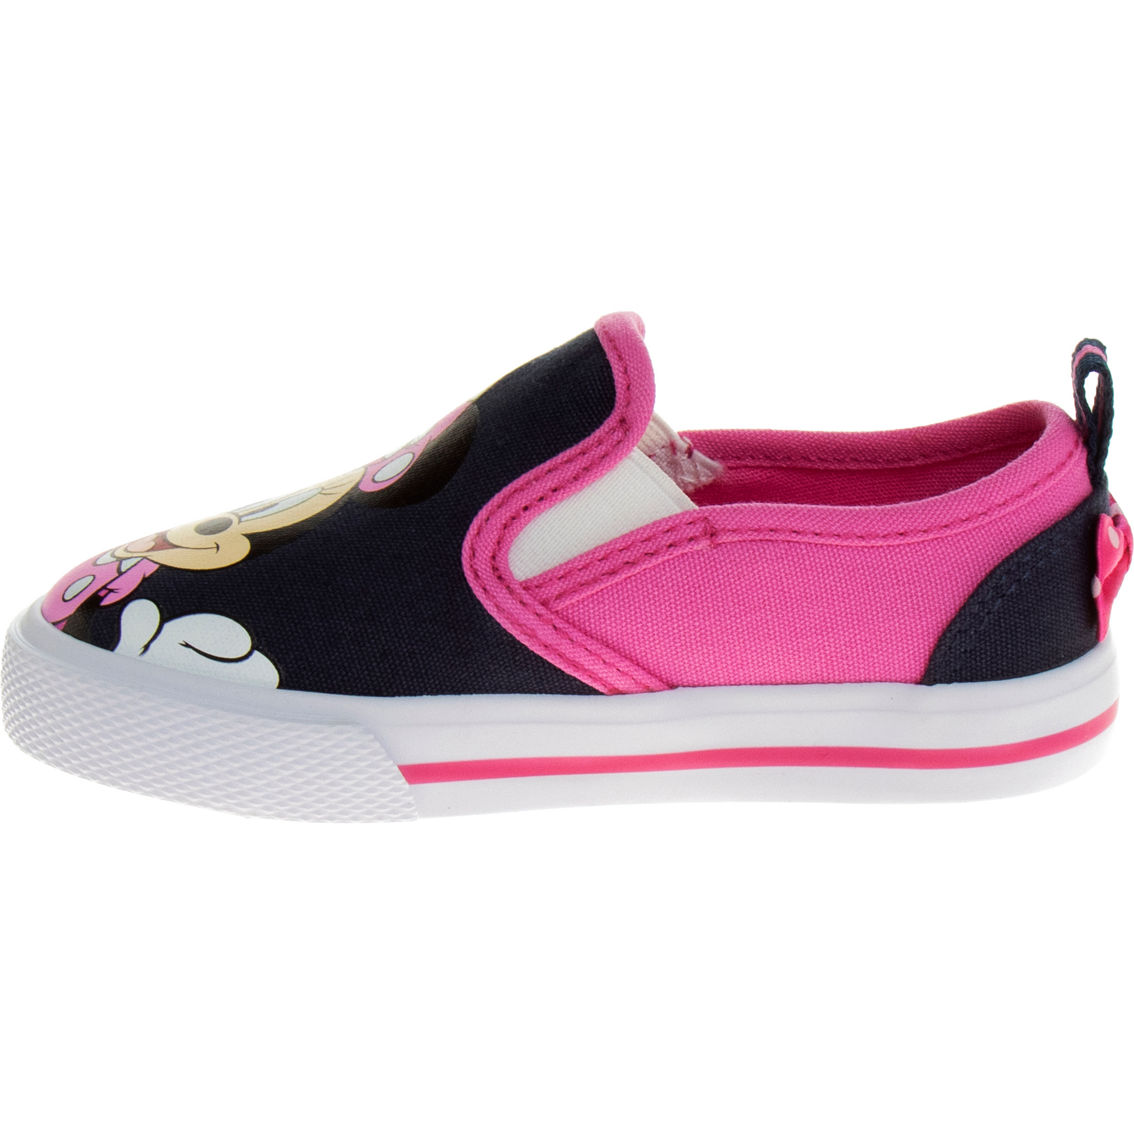 Disney Minnie Mouse Toddler Girls Slip On Sneakers - Image 2 of 5